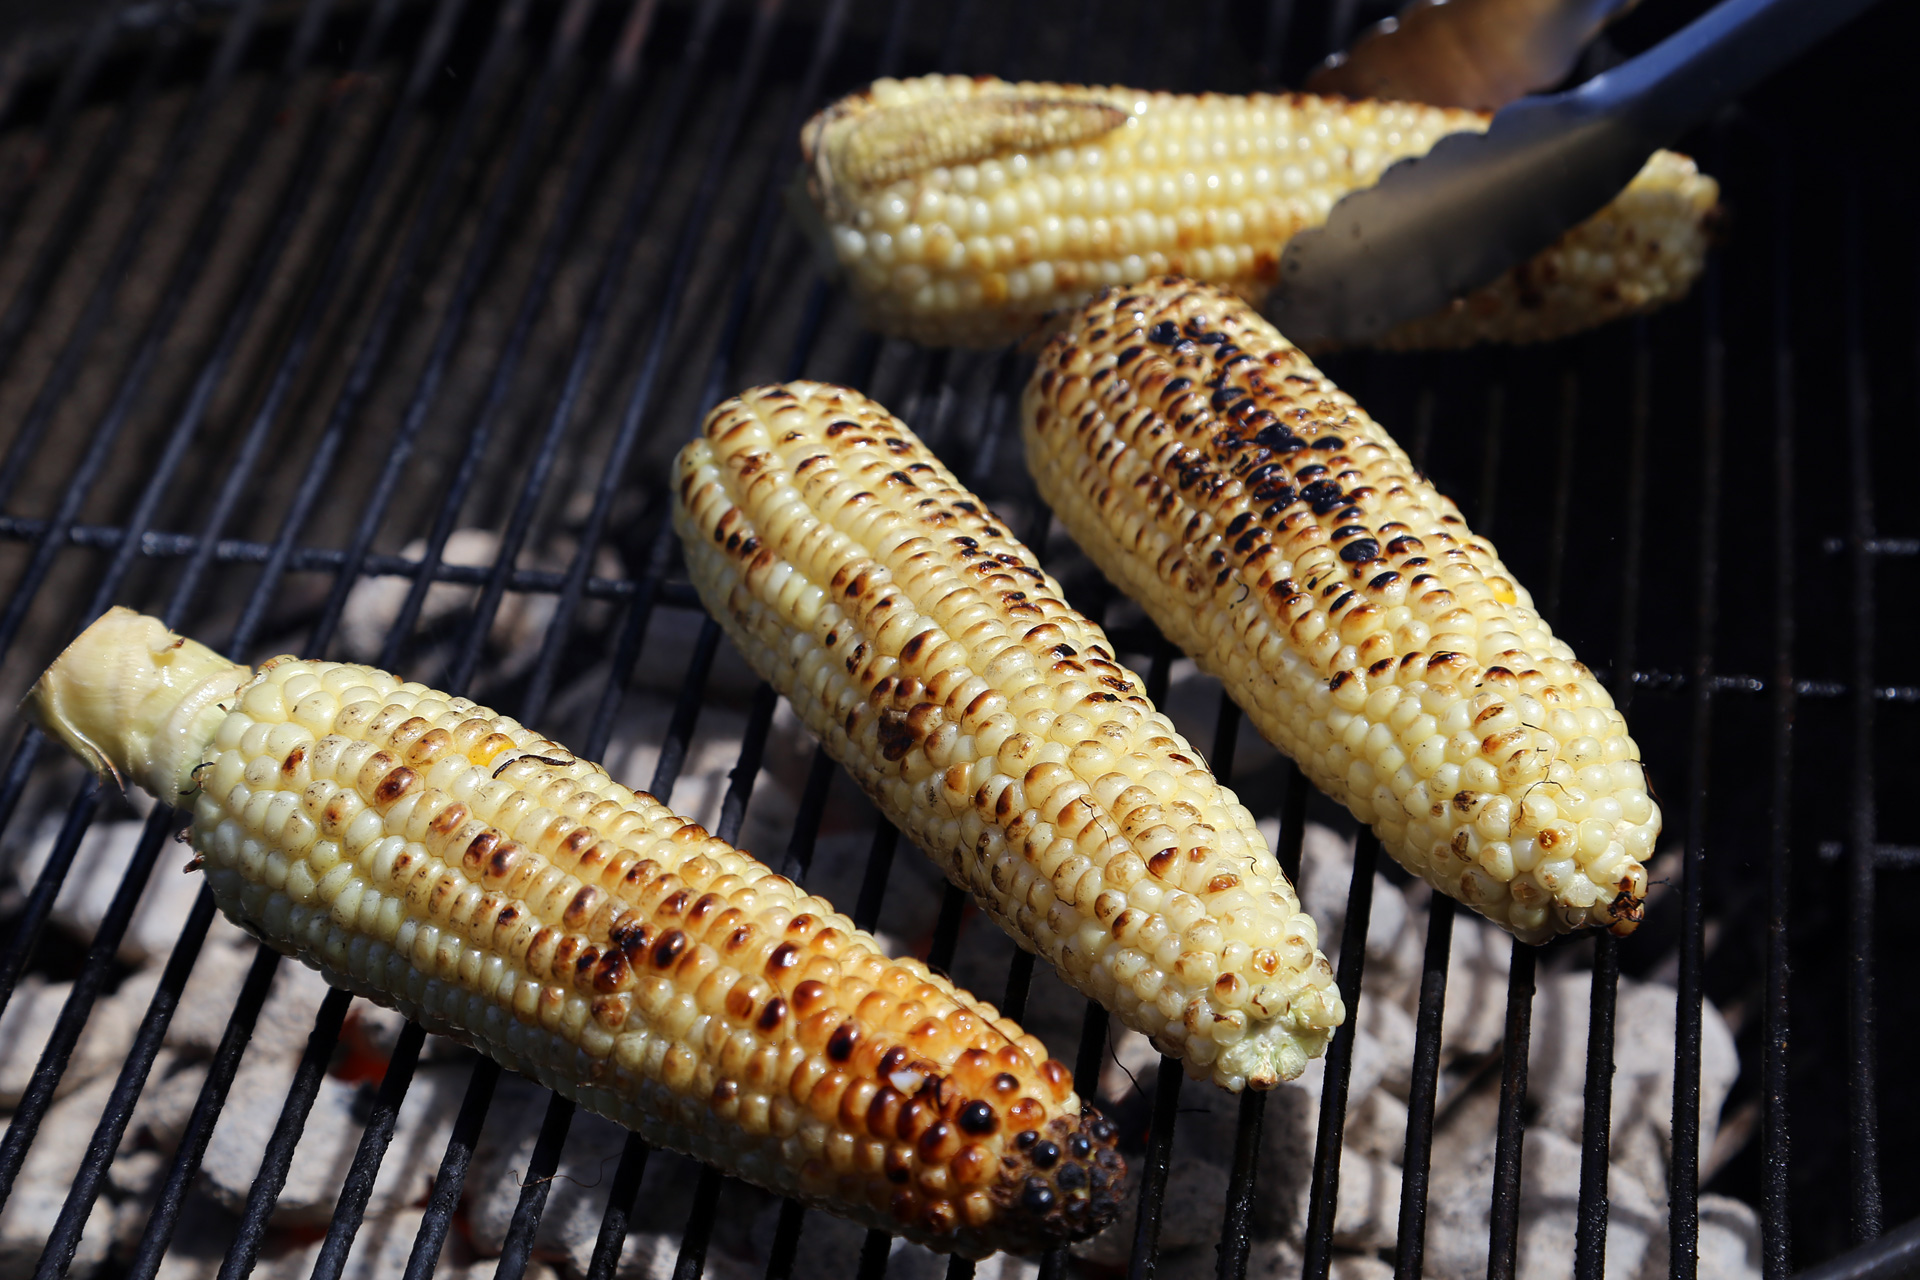 Prepare a charcoal or gas grill for medium-high indirect heat. Clean the grill grate. Rub the corn with olive oil then grill over the fire until nicely charred. Transfer to the cooler side of the grill to cook until tender.